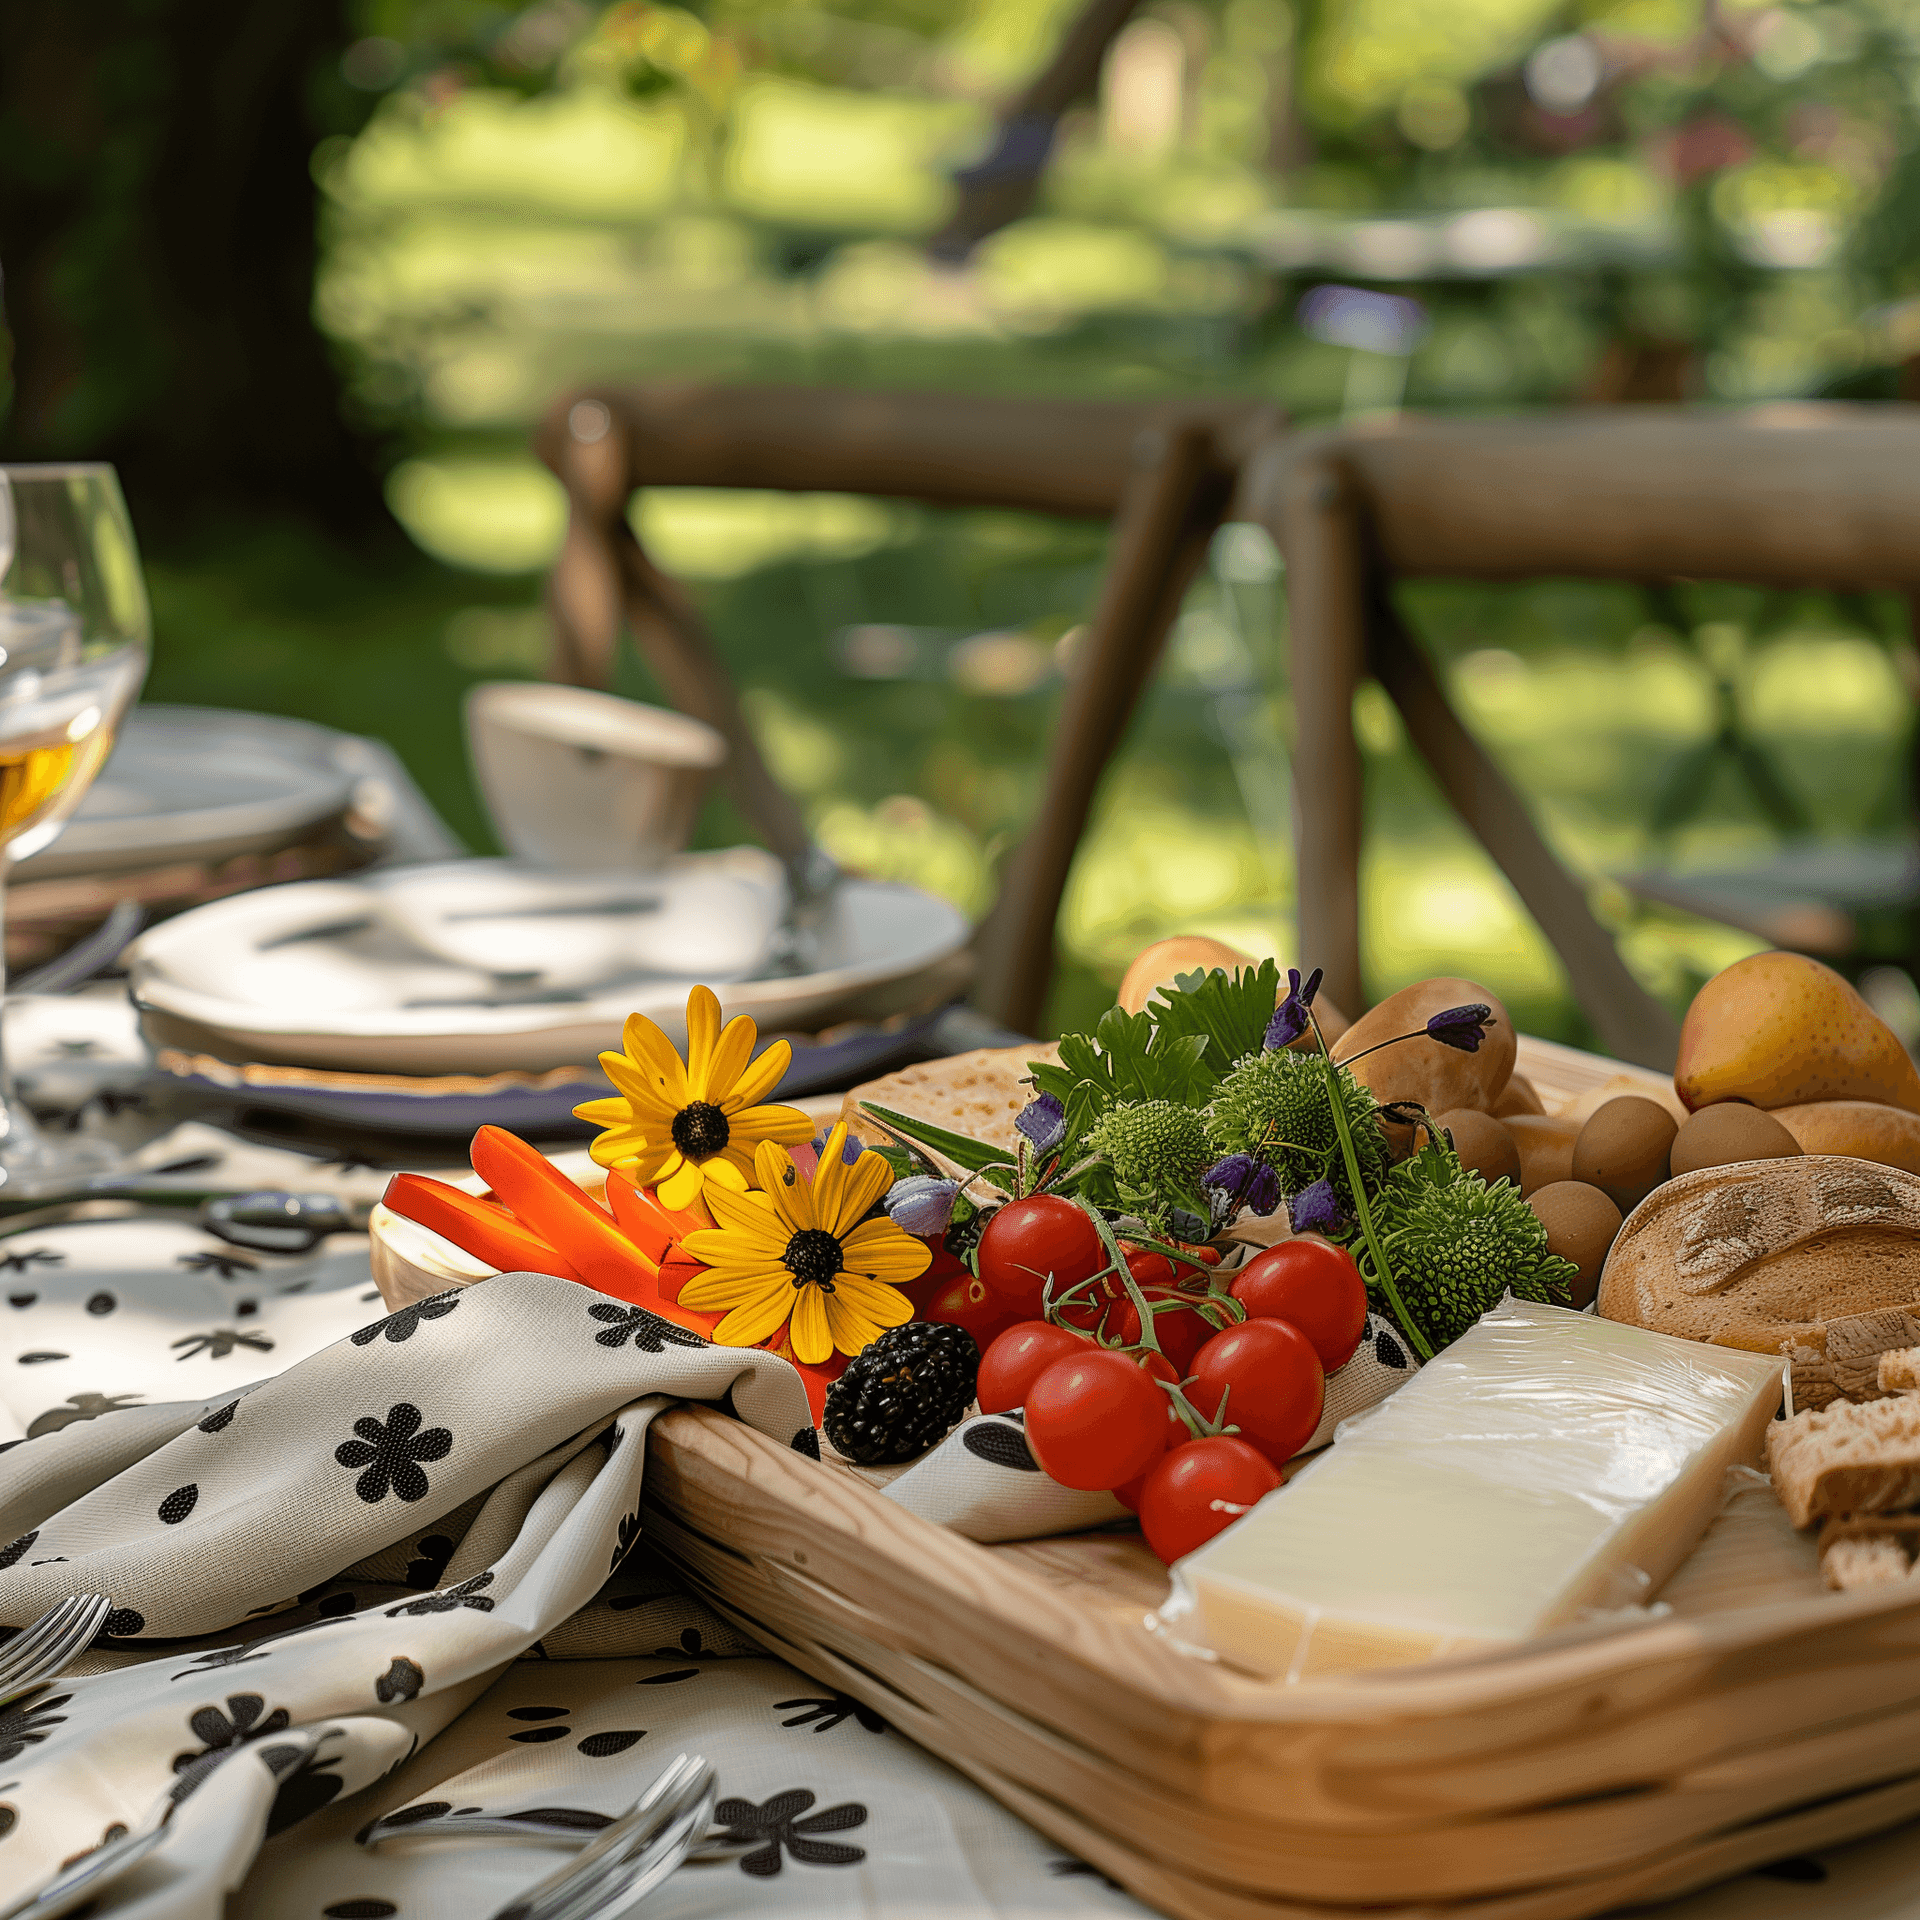 Customized Picnic Experiences